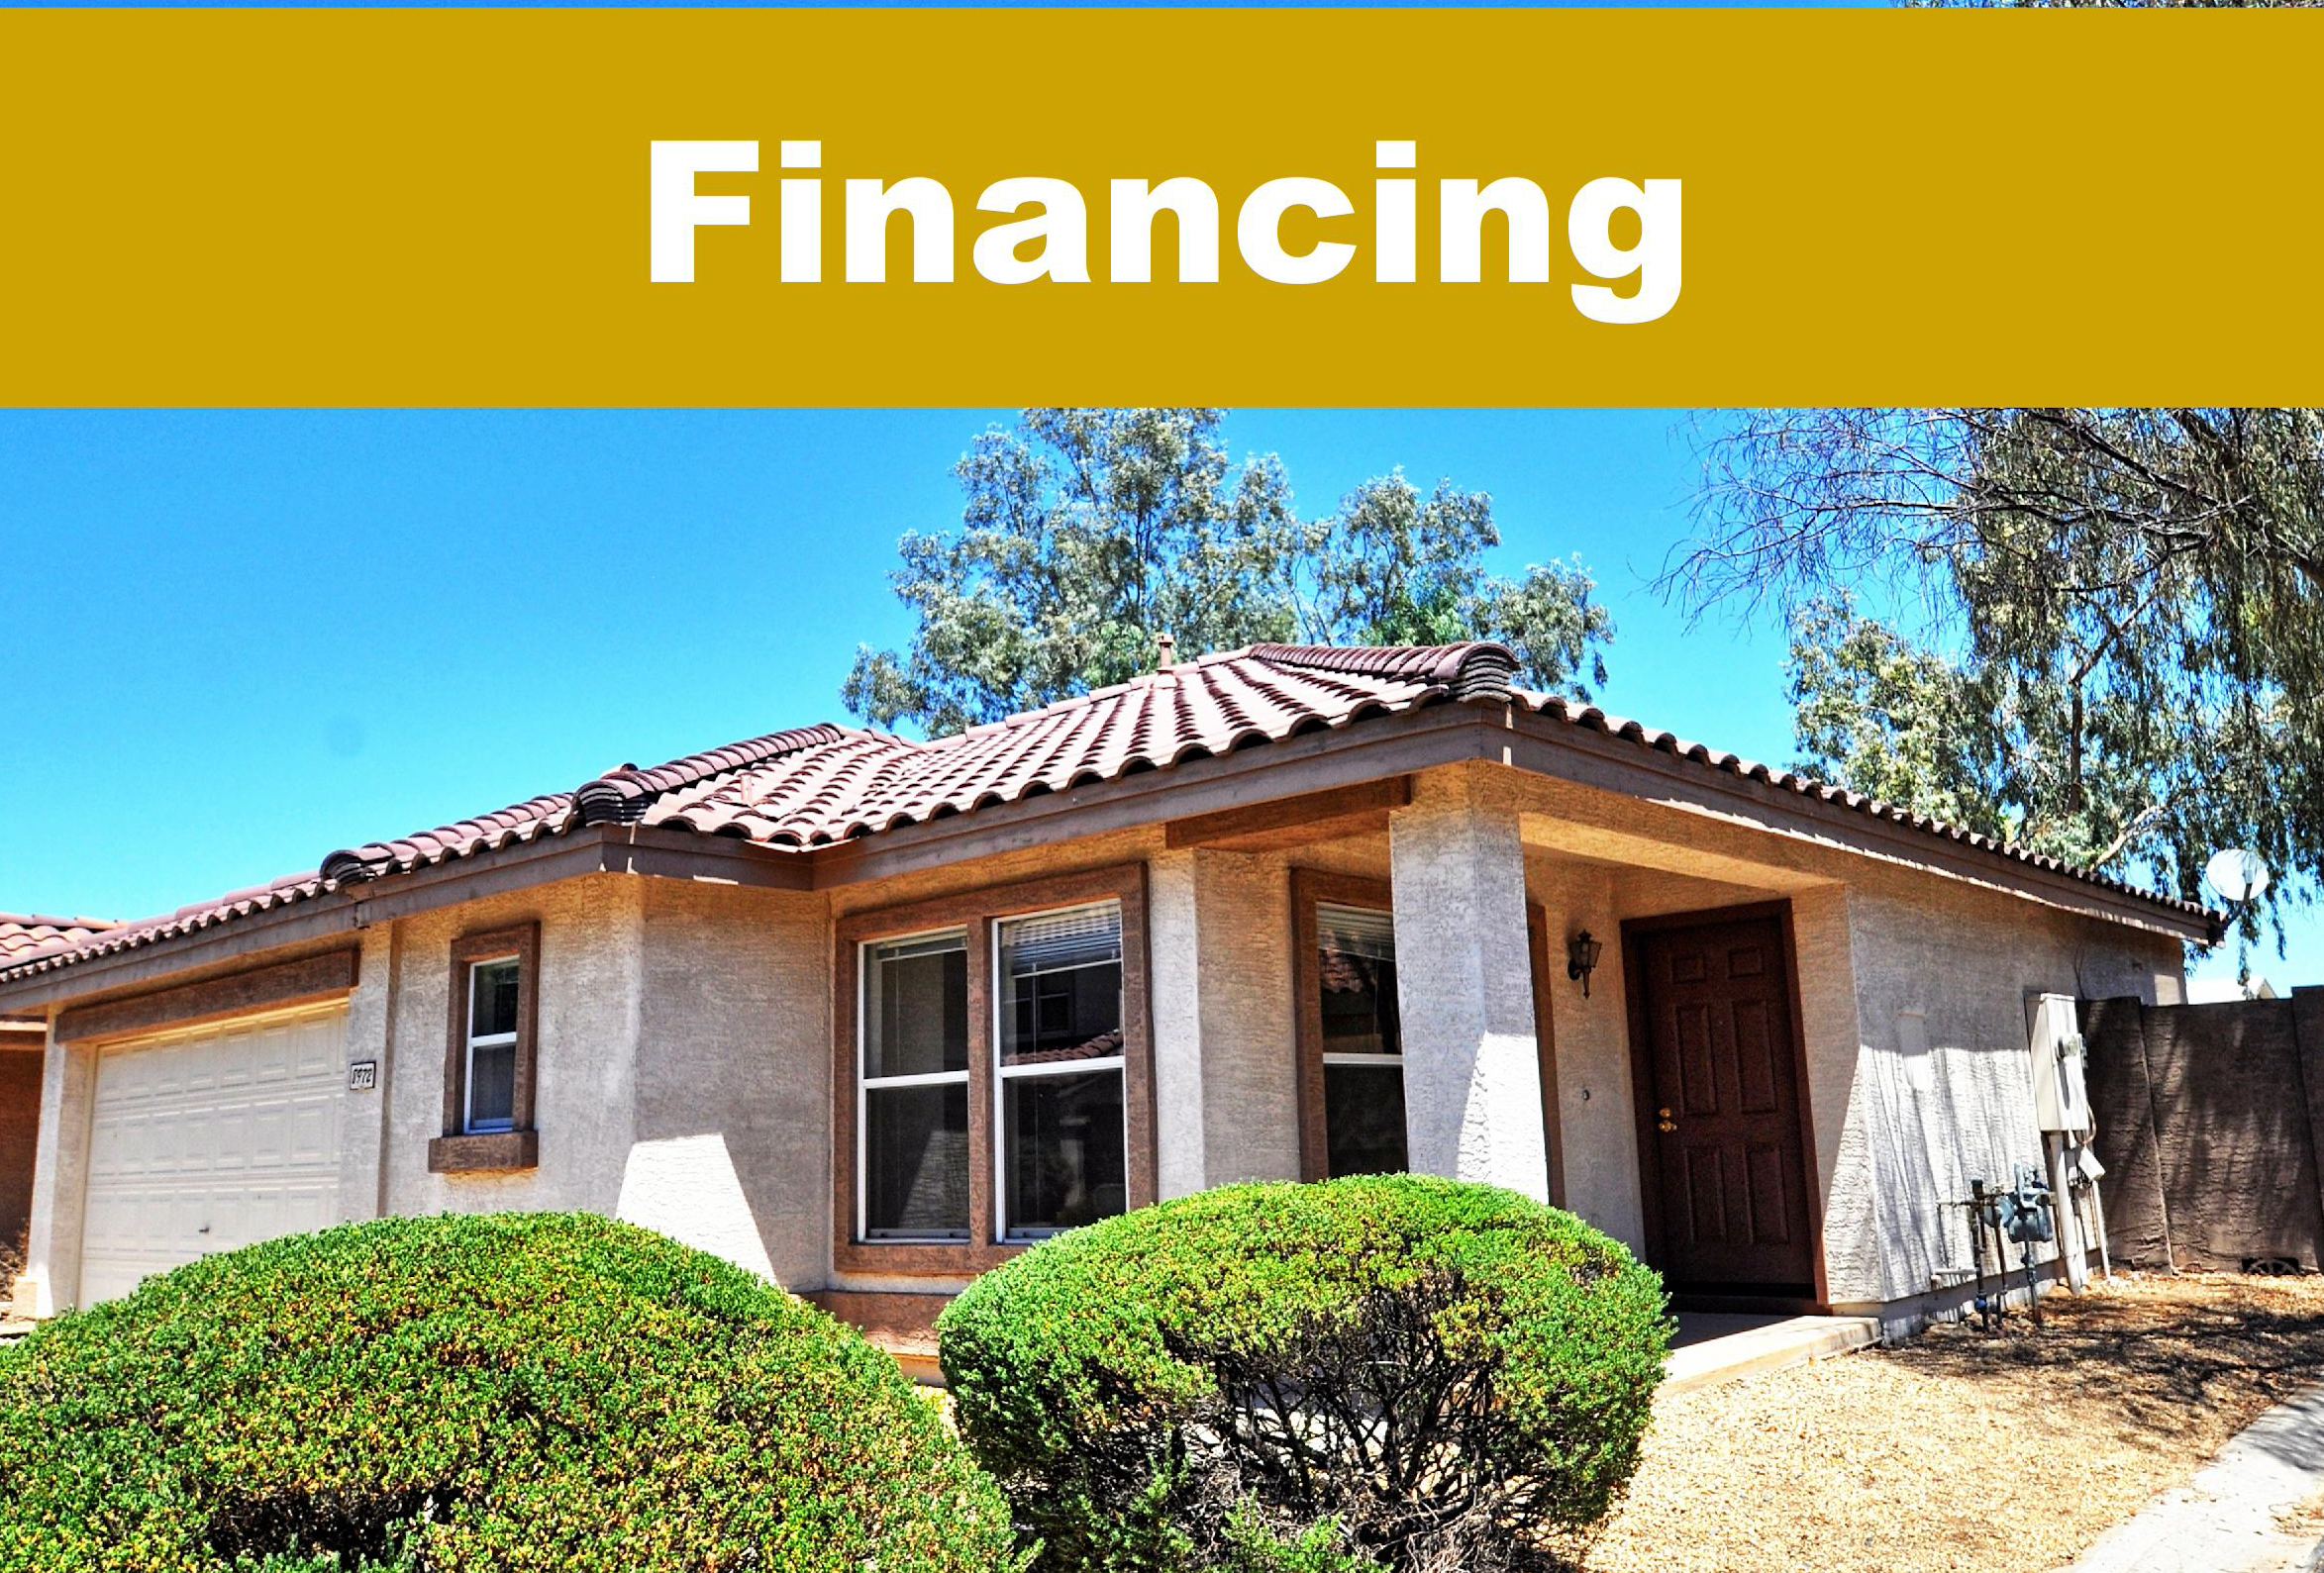 Dealing with Financing